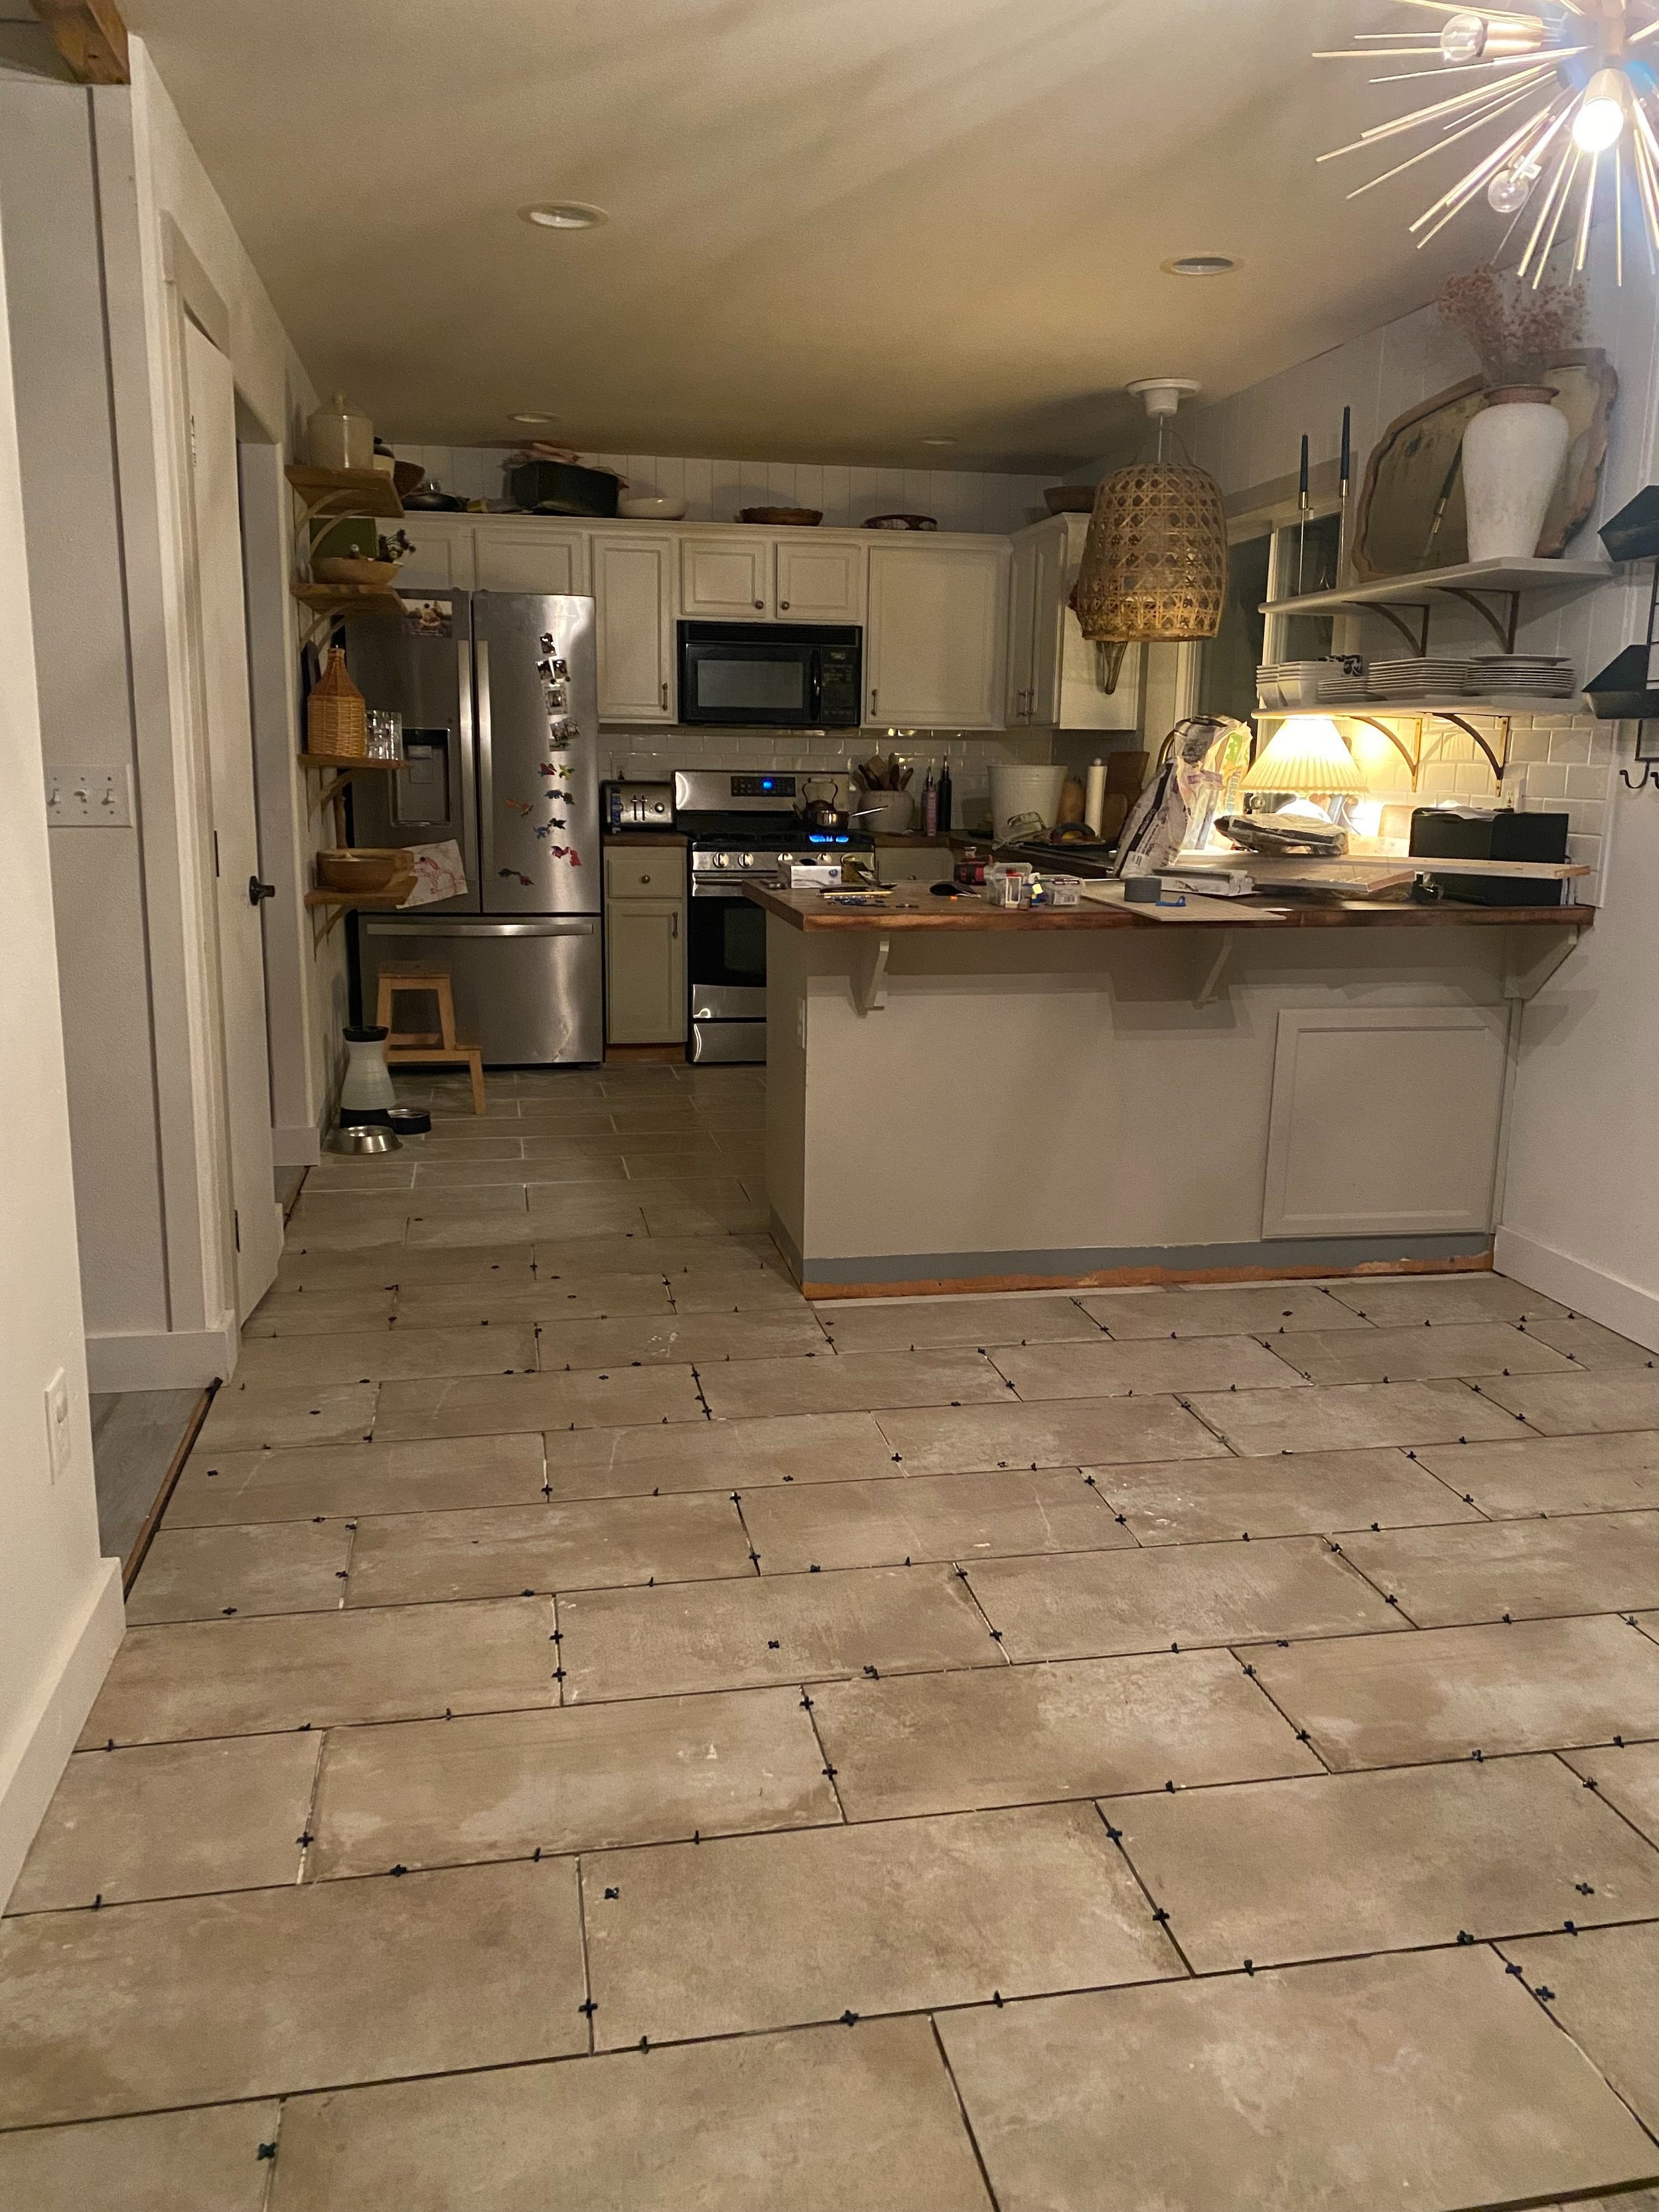  We did the space in 4 parts. The kitchen was first, this was second. The family room we split in two. I wanted to capture this image to compare to the first before photo I took after our old flooring was removed. 